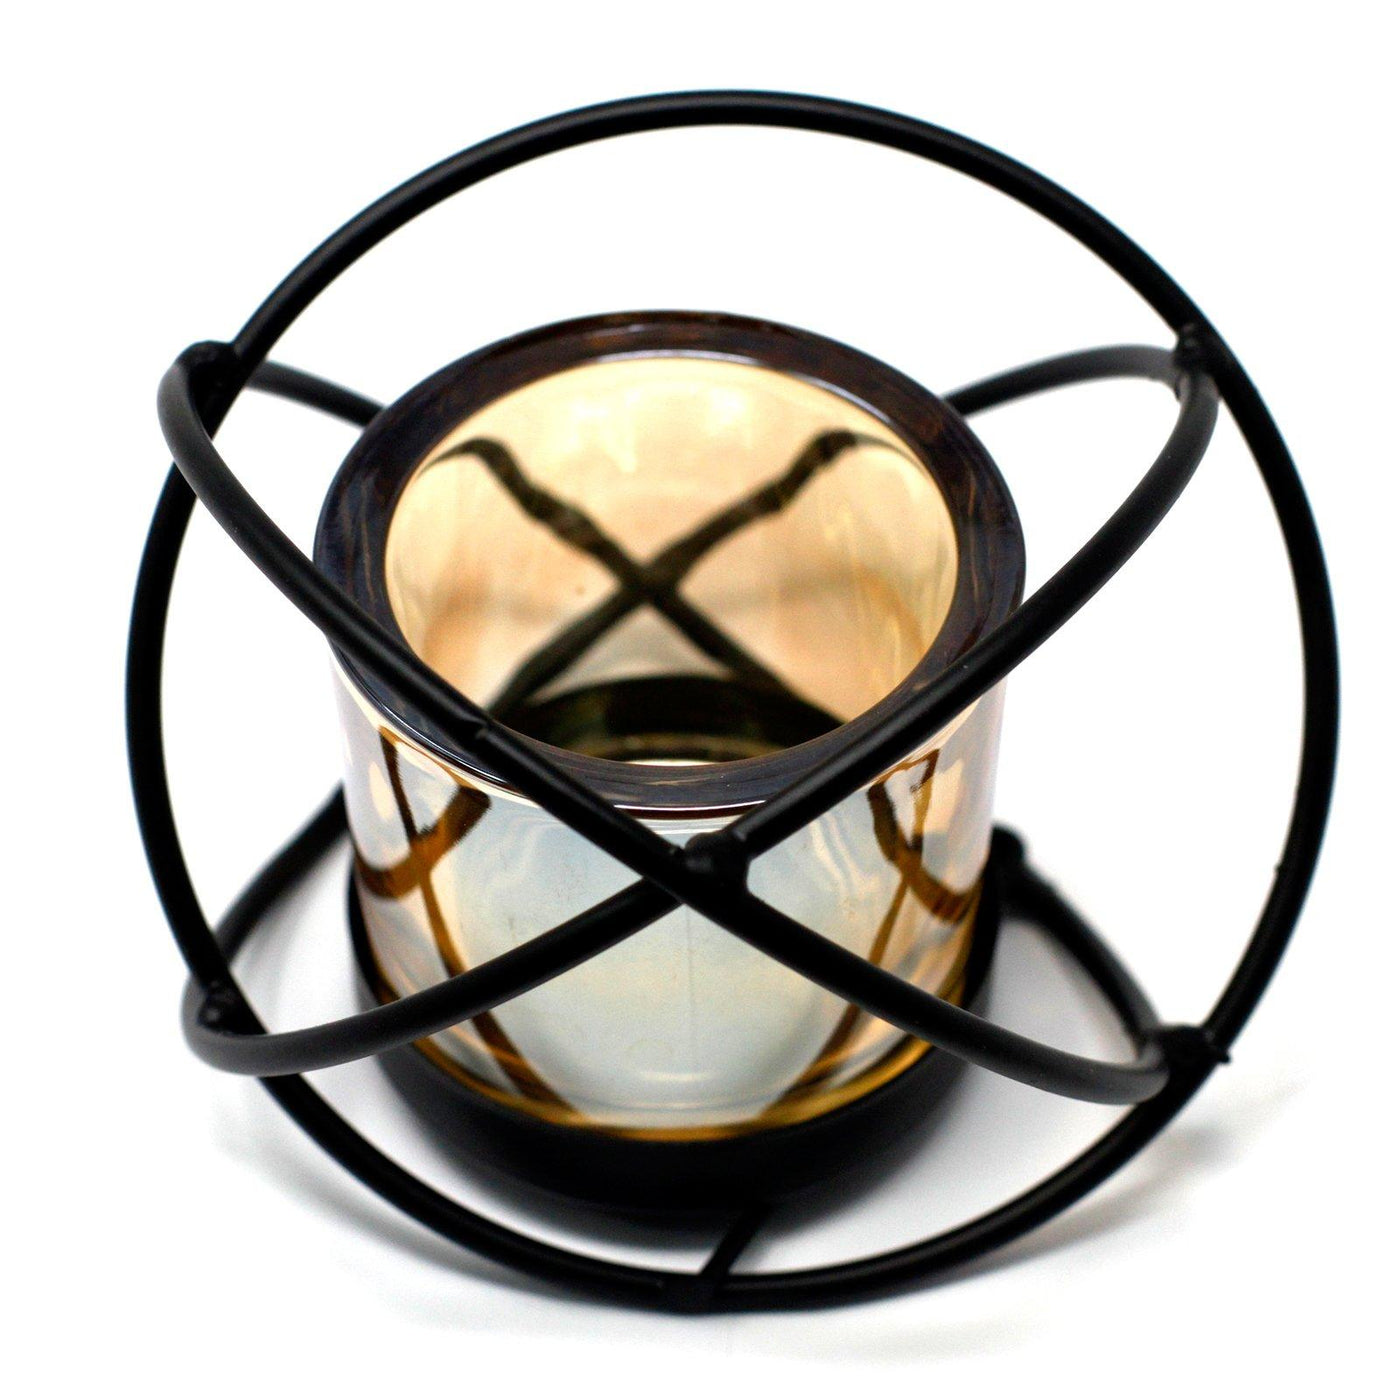 Centrepiece Silhouette Single Cup Gold Amber Glass And Iron Votive Tealight Candle Holder.